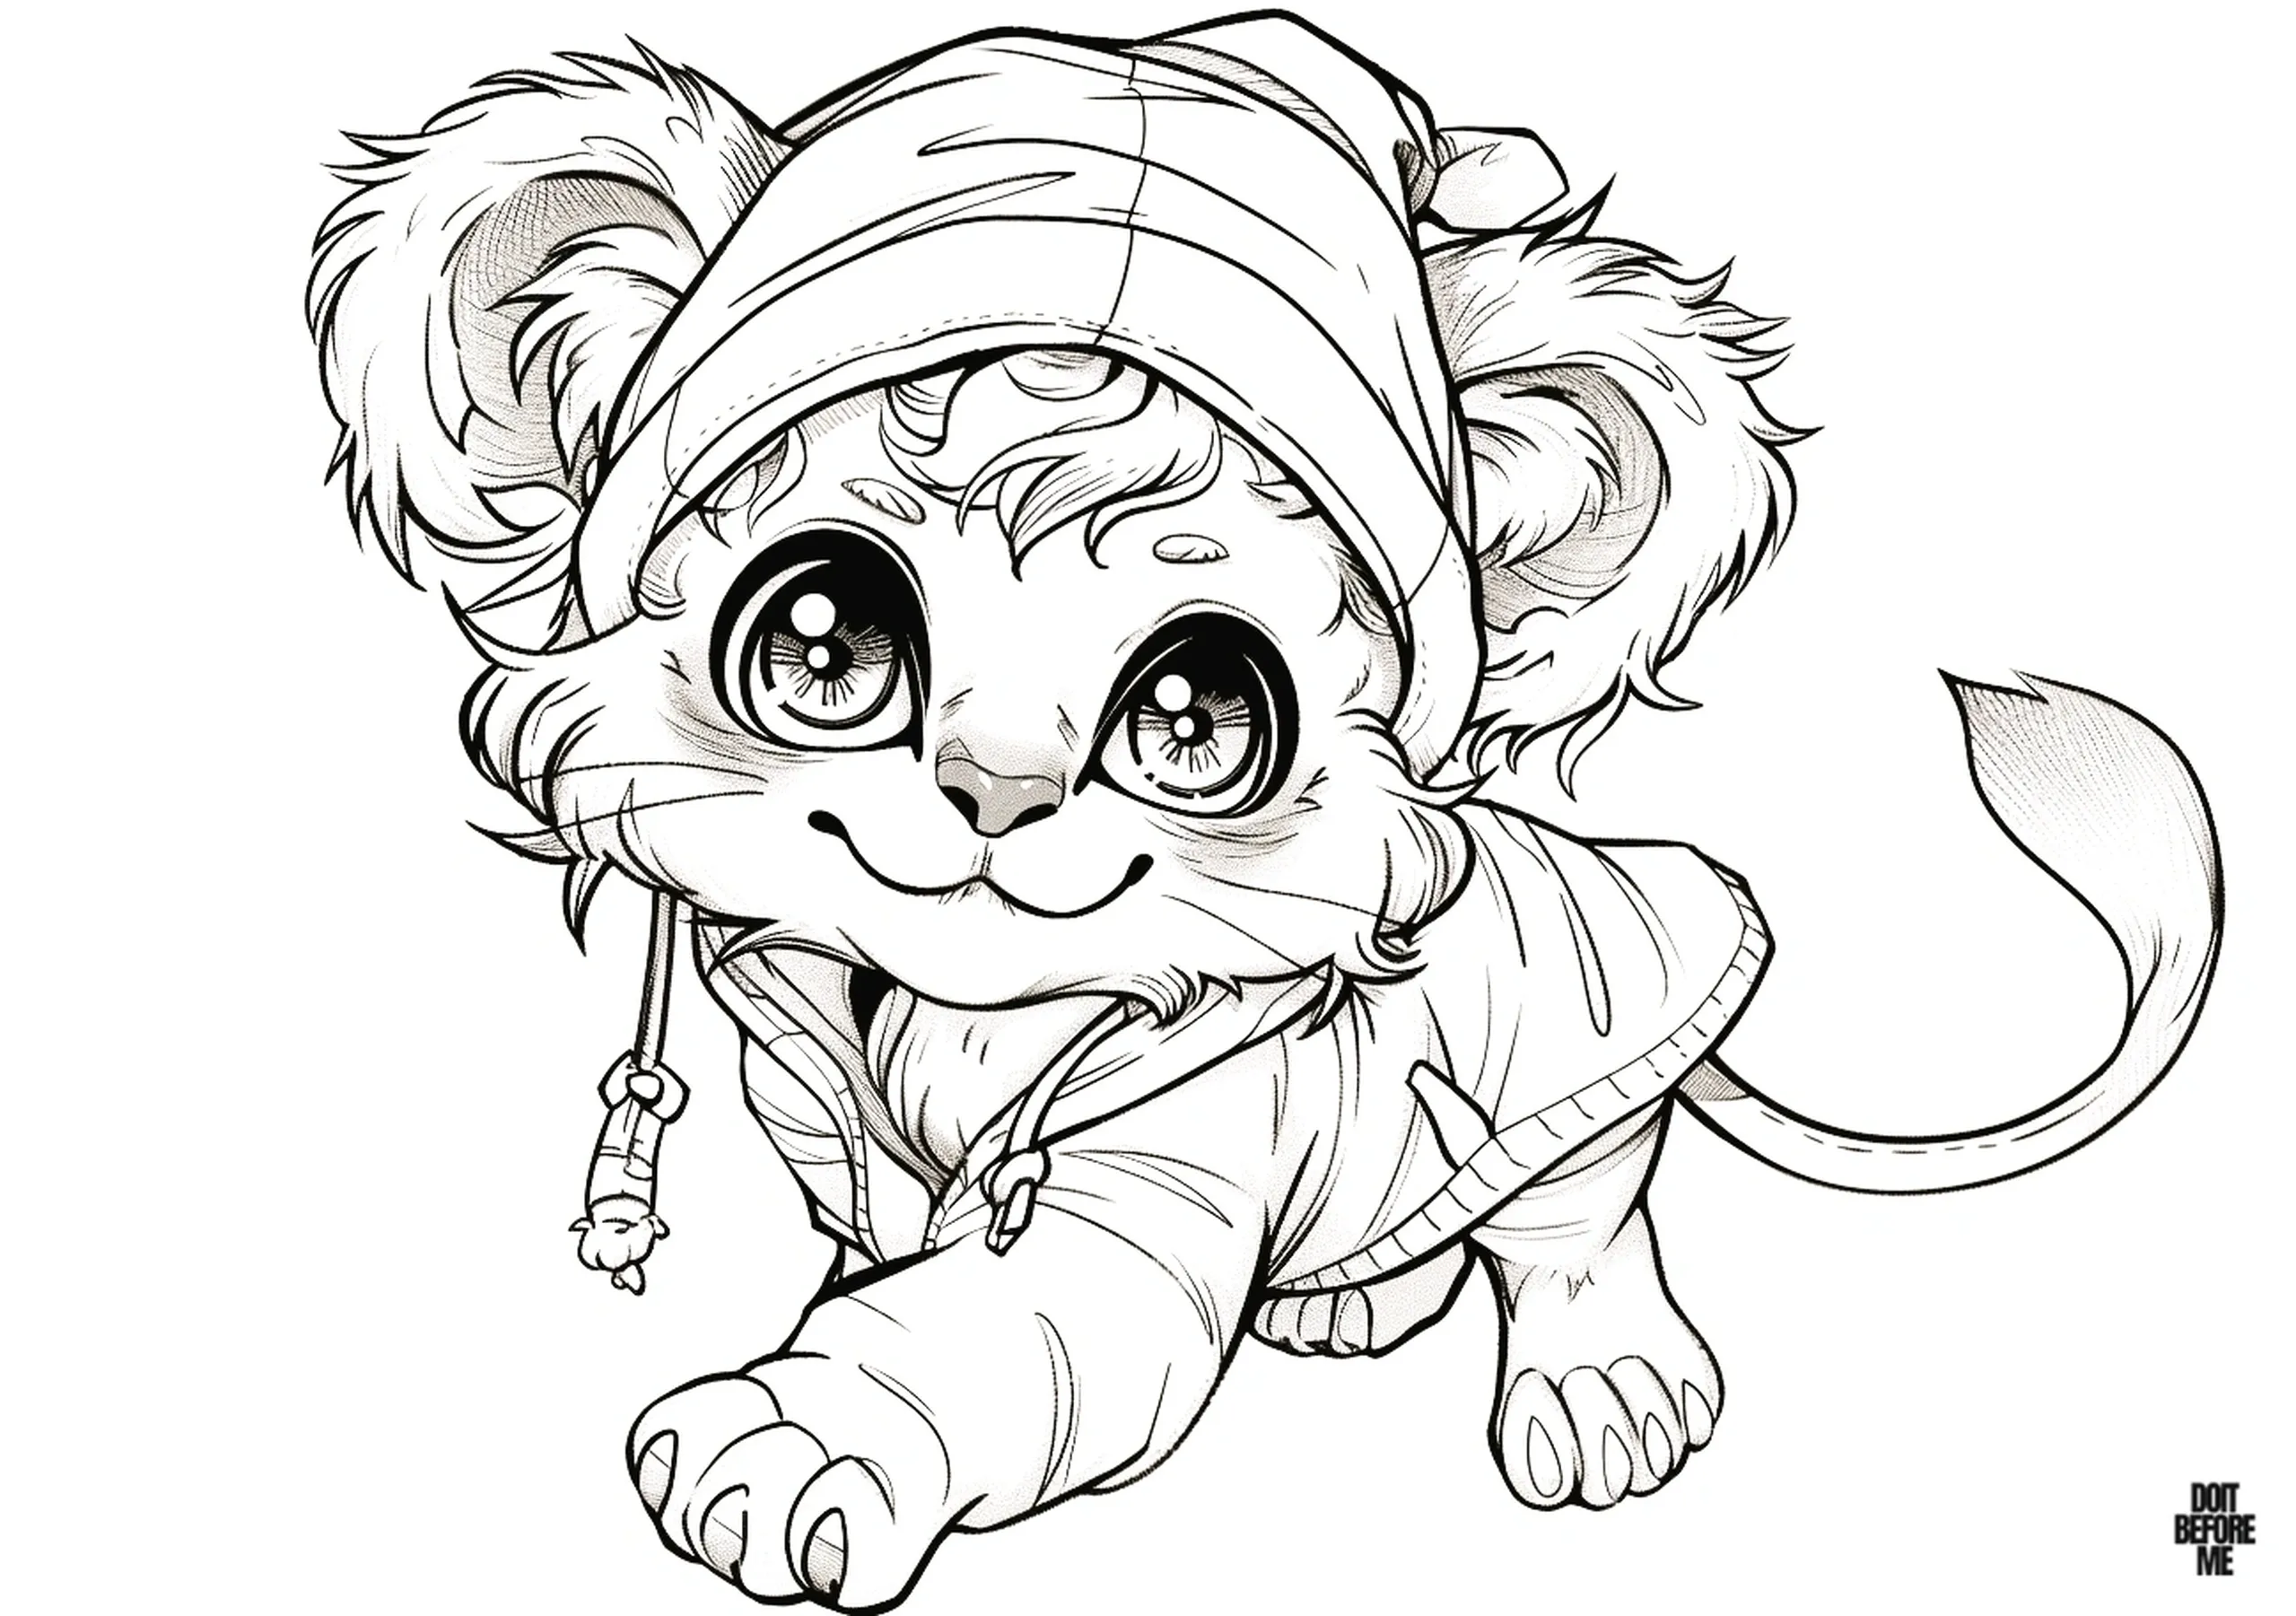 A detailed printable coloring page featuring a cute baby lion cub in a sporty outfit with kawaii-style eyes, suitable for adults.